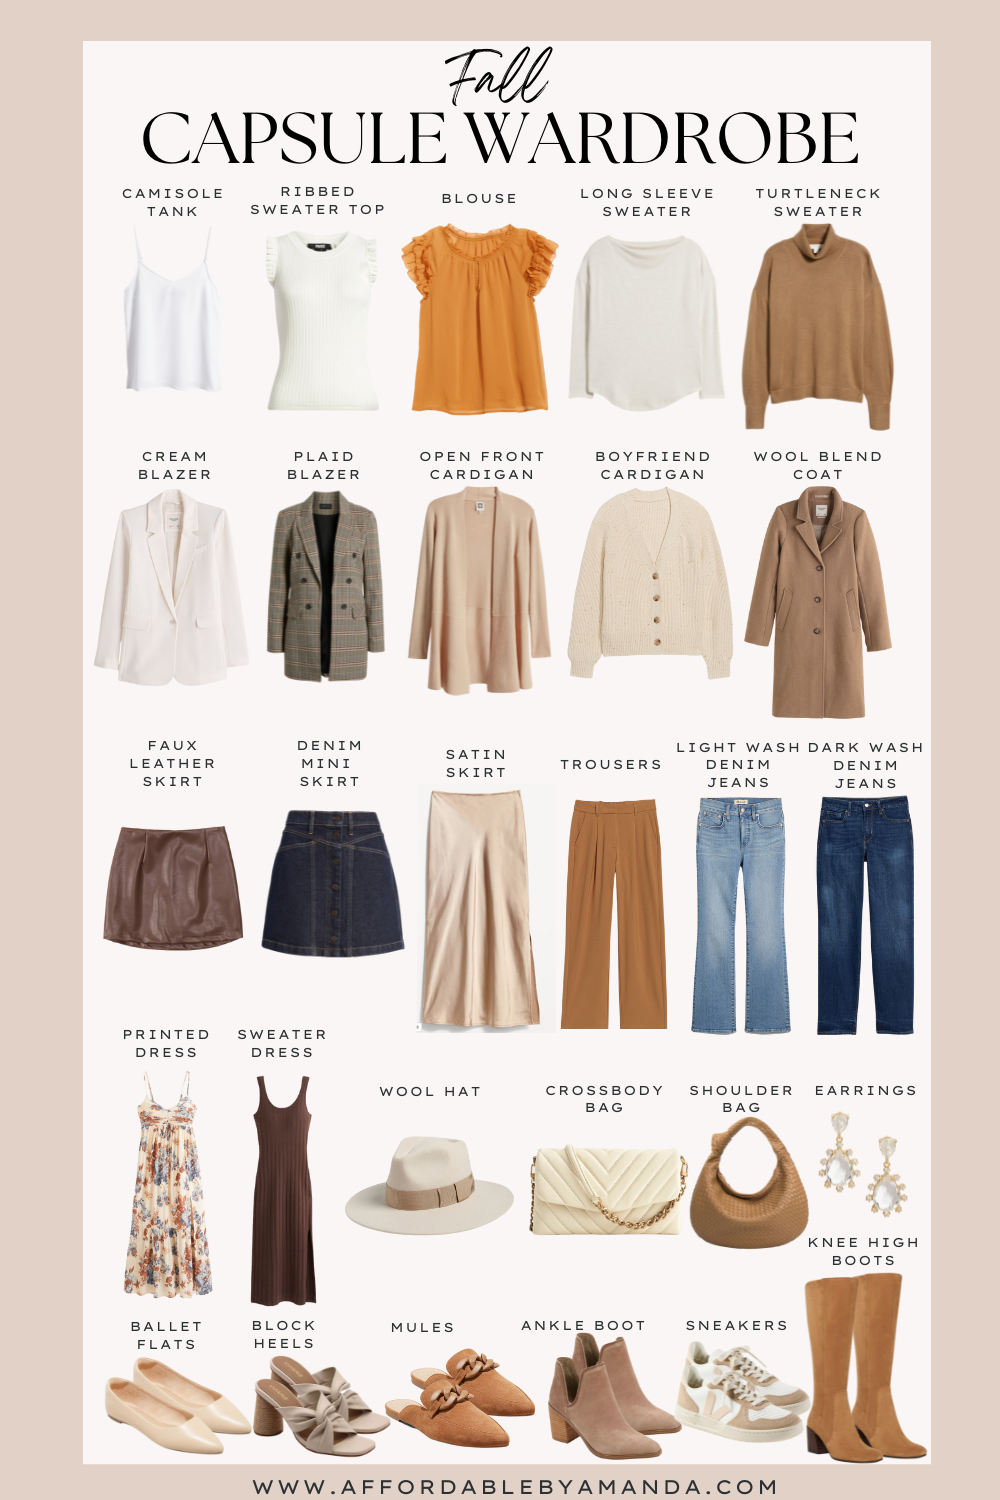 Create Your Affordable Capsule Wardrobe With This Budget-Friendly Guide